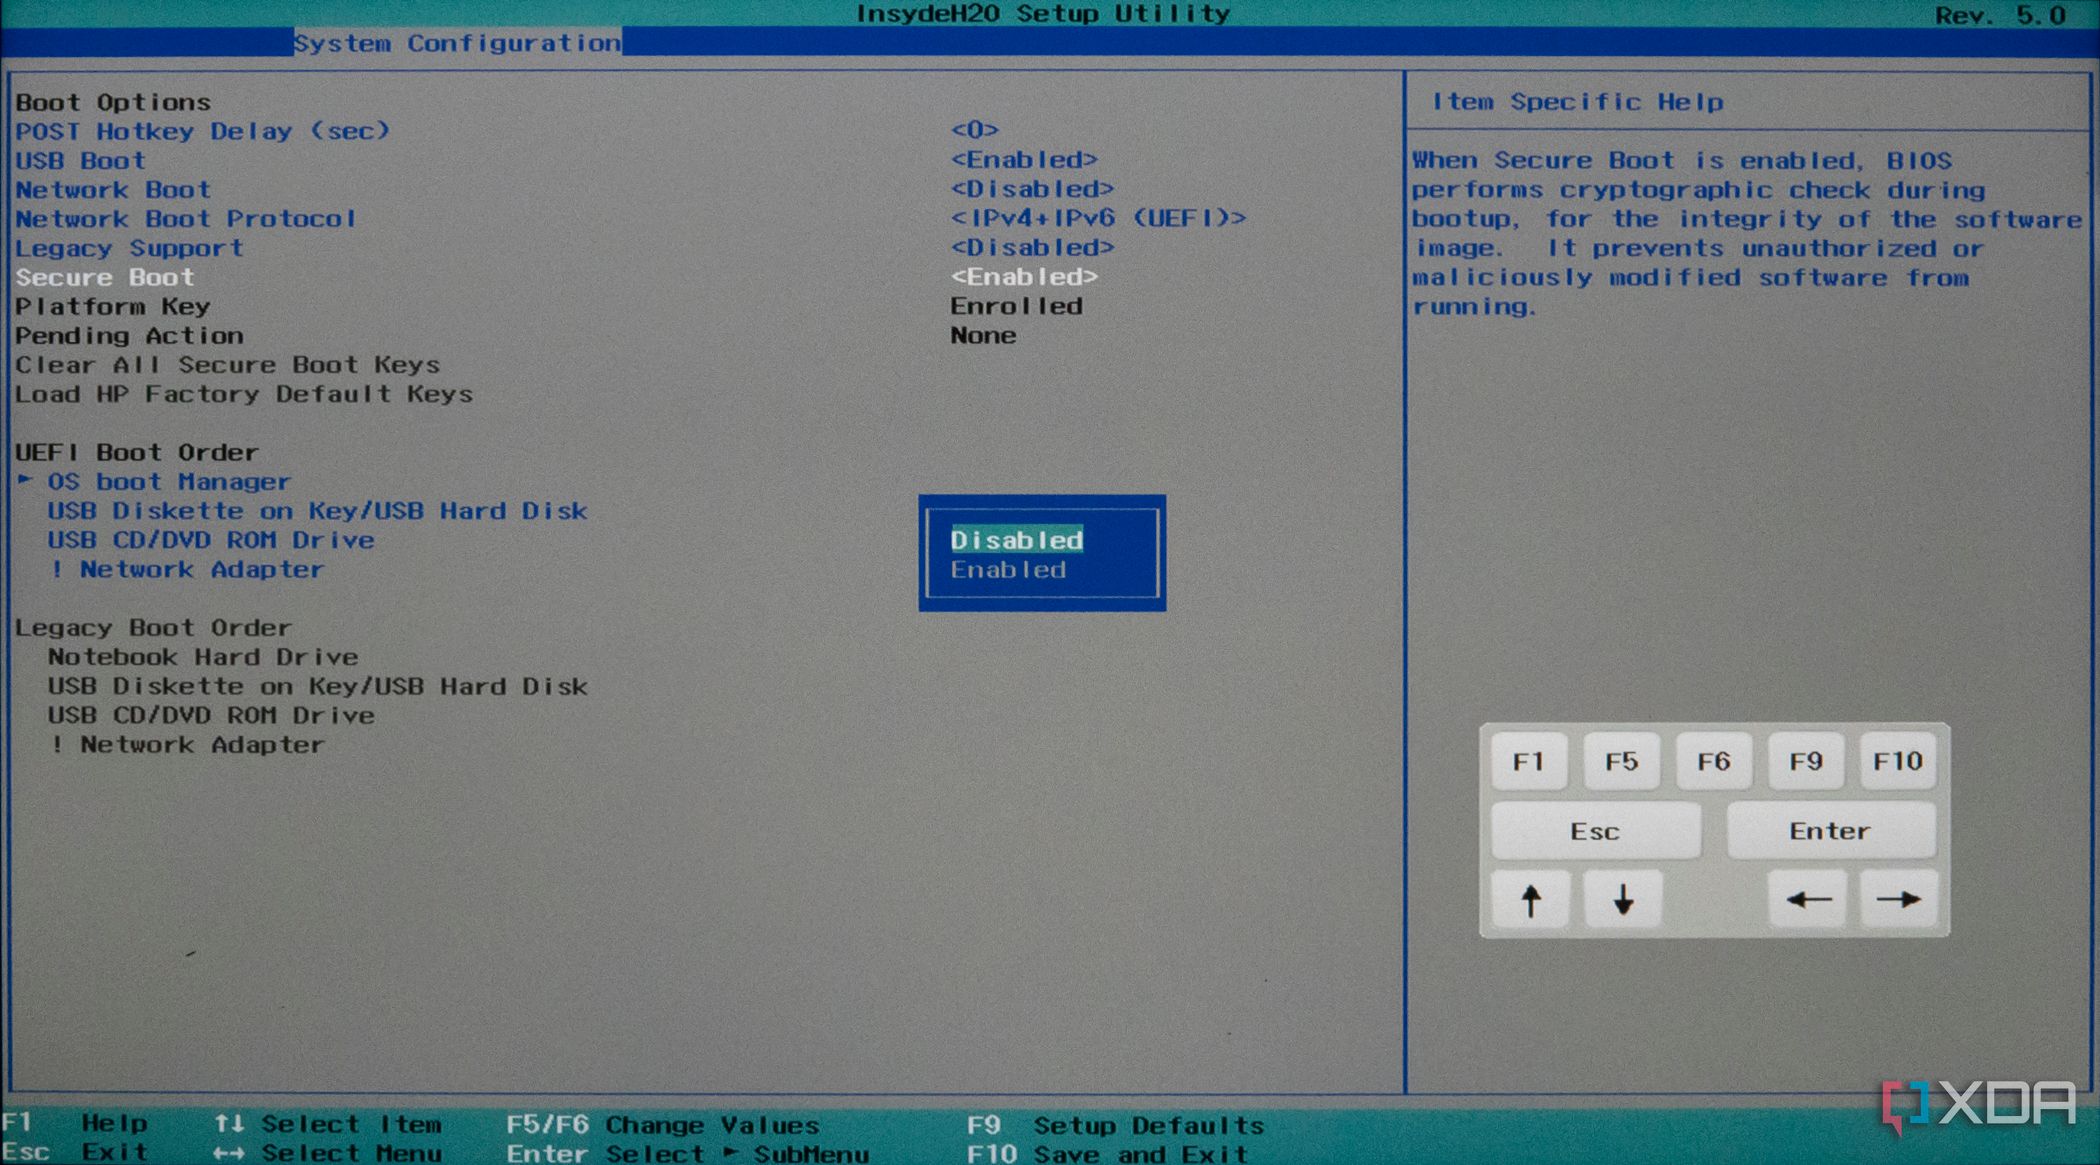 Screenshot of HP BIOS with Secure Boot disabled